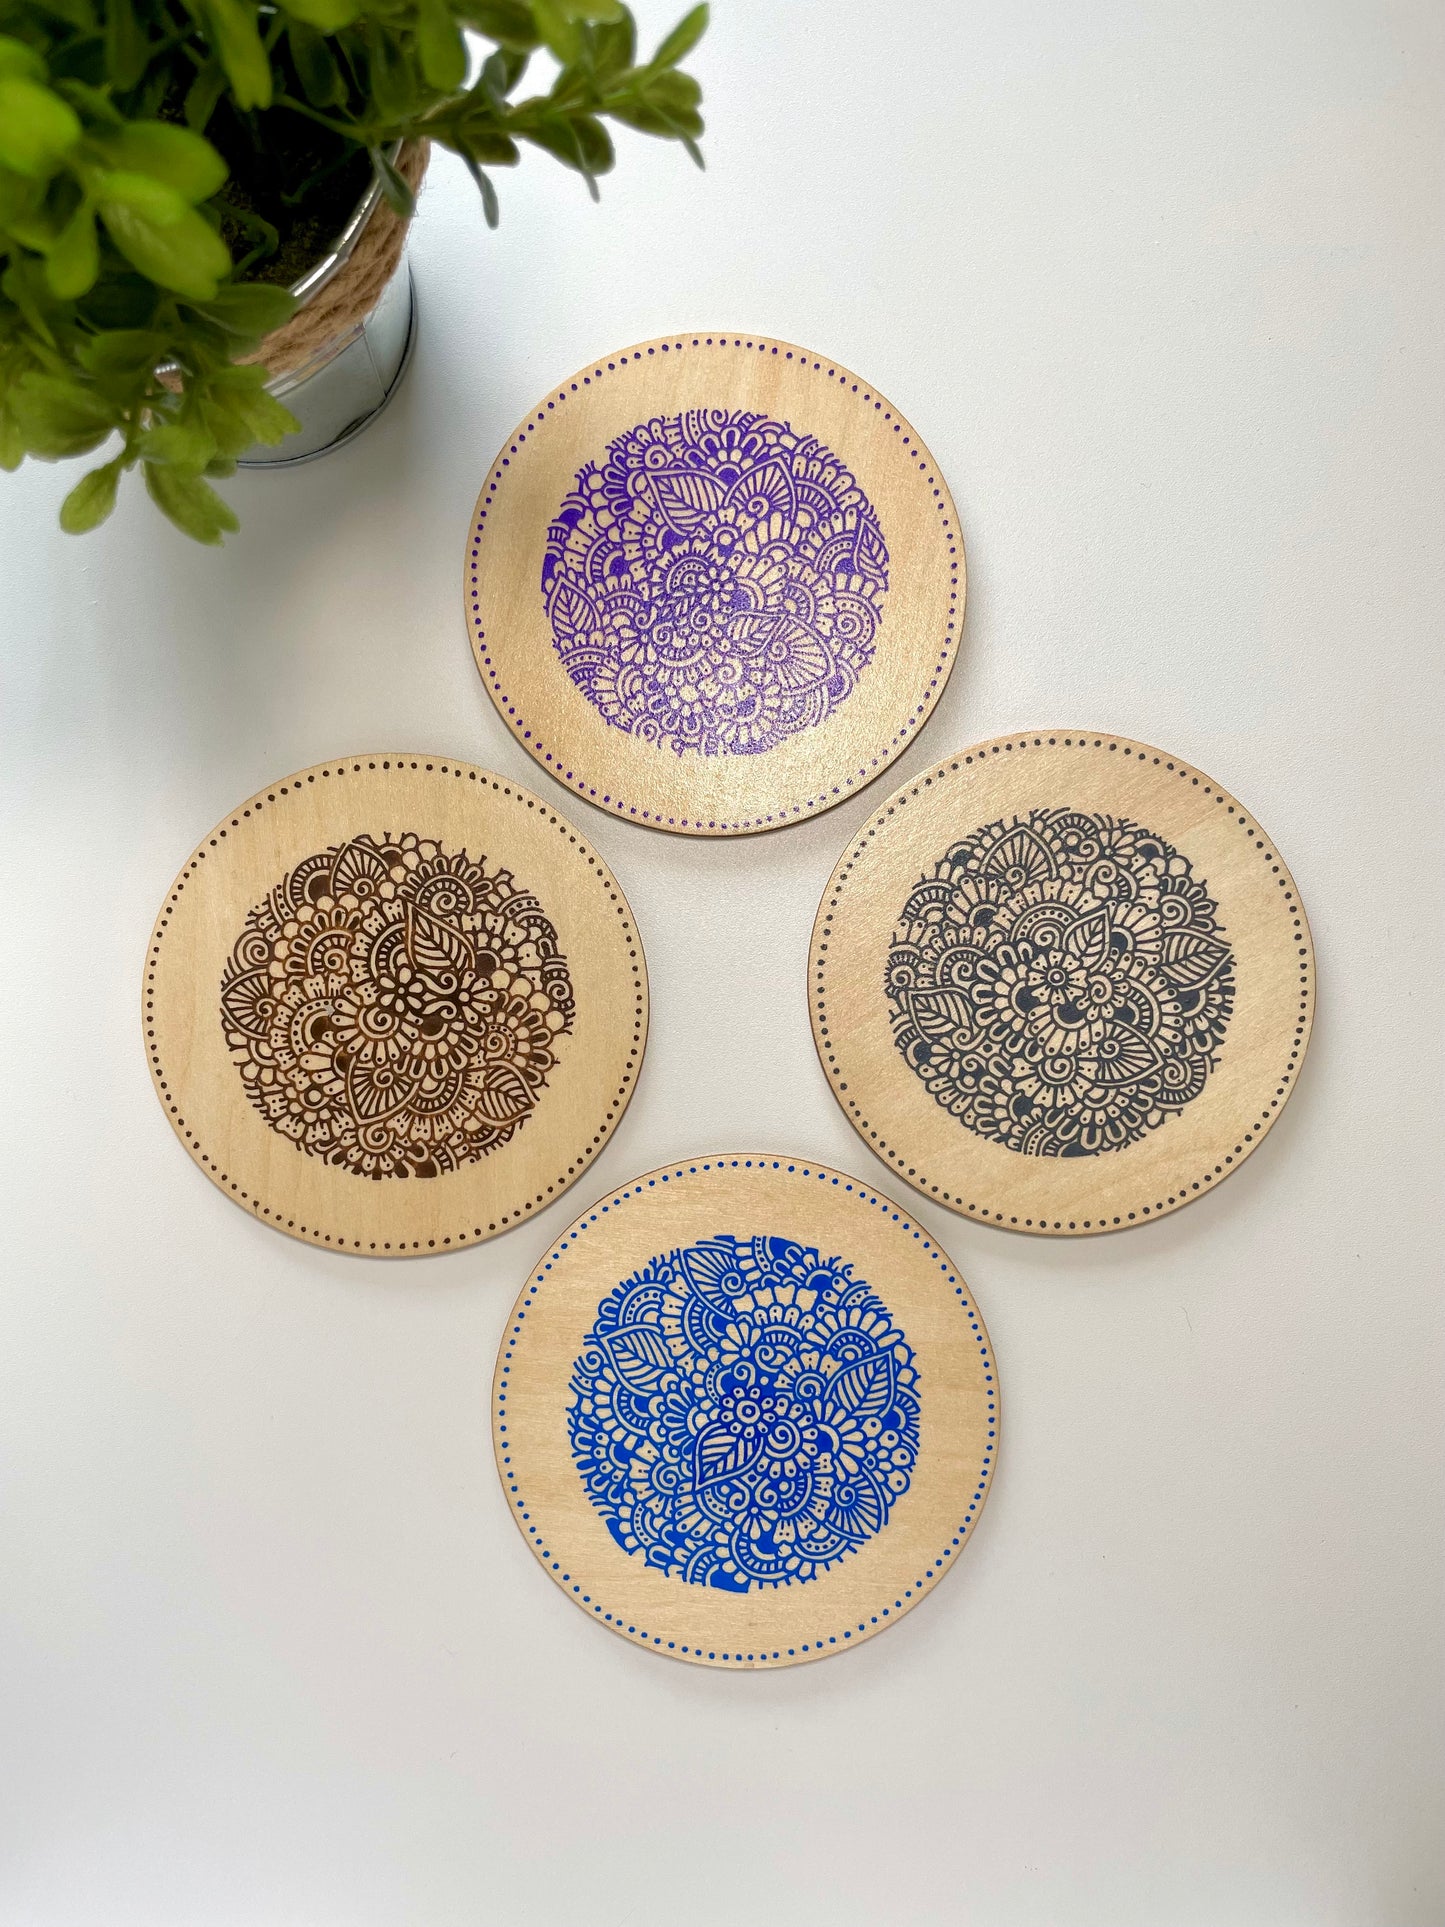 Hand Painted Wood Coasters with Zentangle Designs